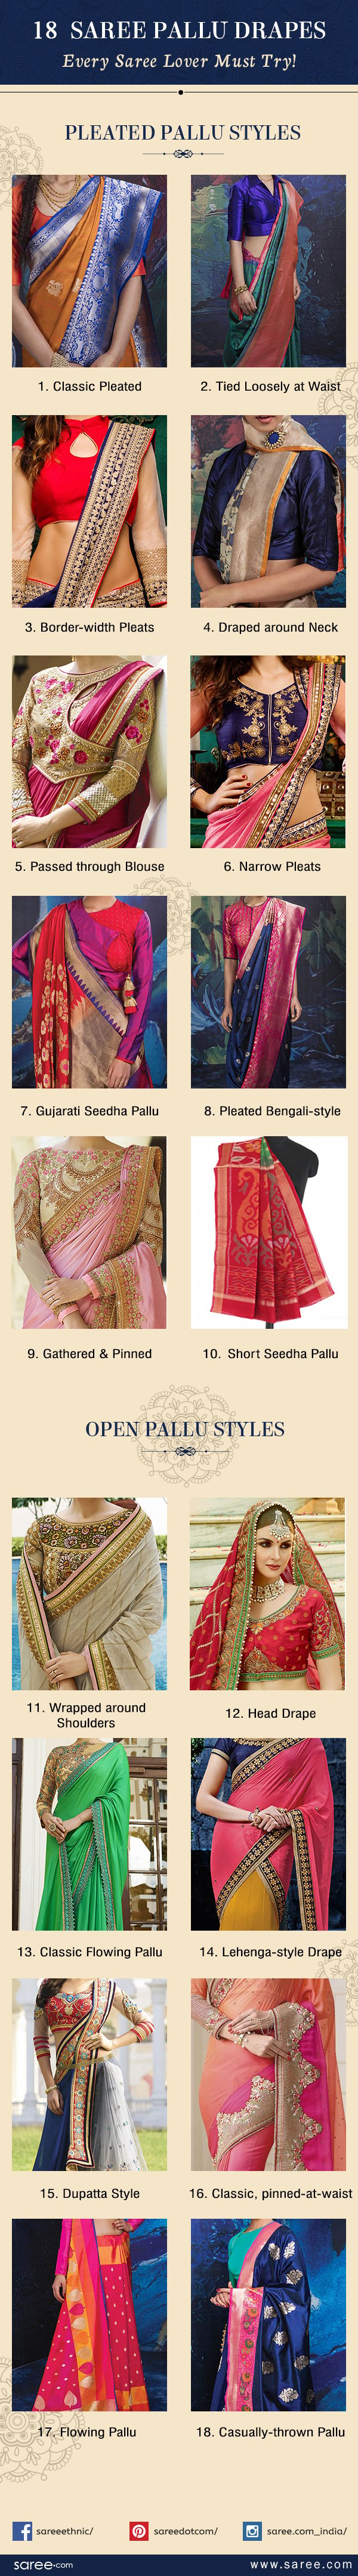 18-gorgeous-saree-pallu-drapes-you-must-try-infographic